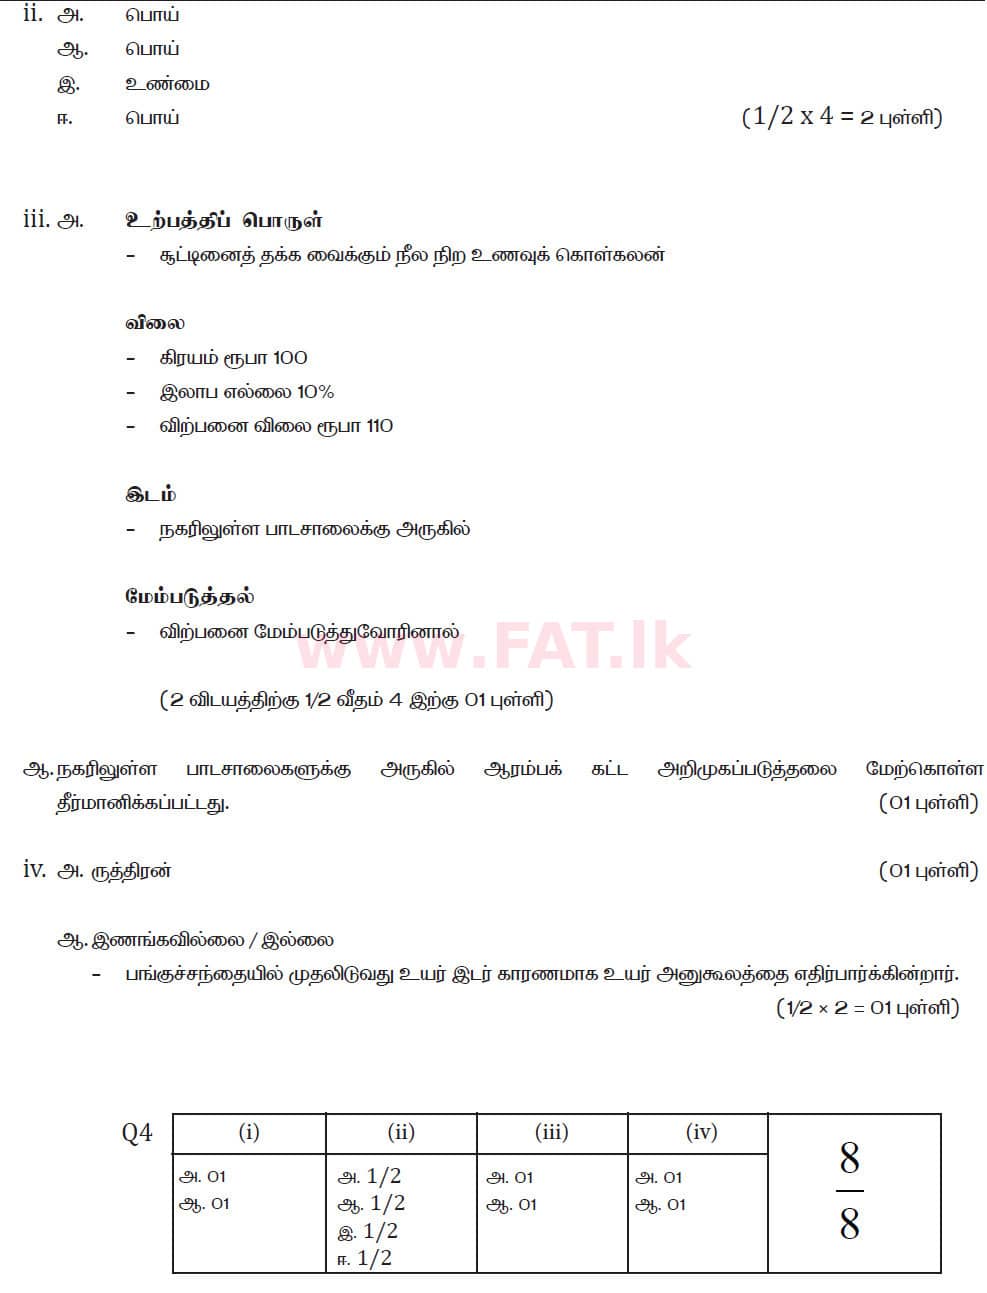 National Syllabus : Ordinary Level (O/L) Business and Accounting Studies - 2019 March - Paper II (தமிழ் Medium) 4 5987